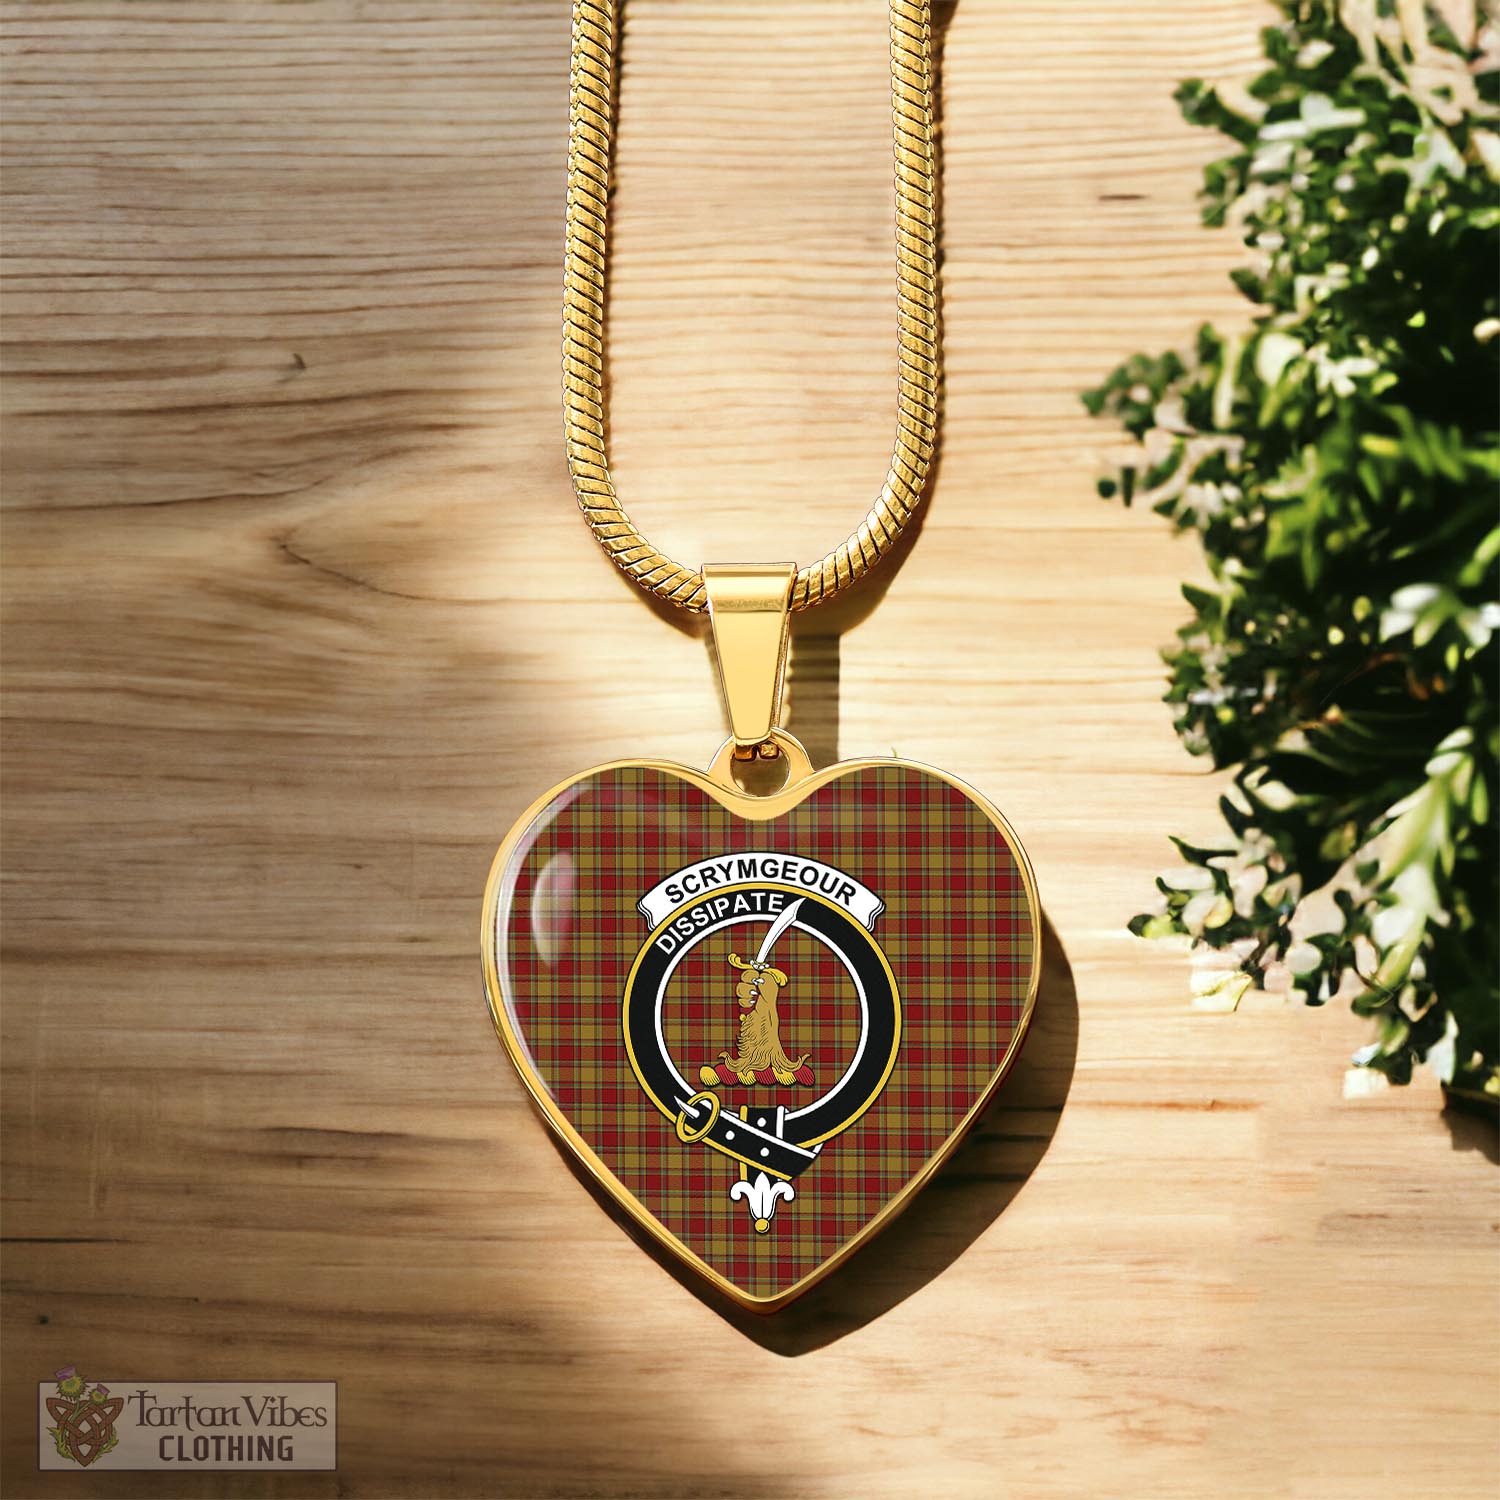 Tartan Vibes Clothing Scrymgeour Tartan Heart Necklace with Family Crest